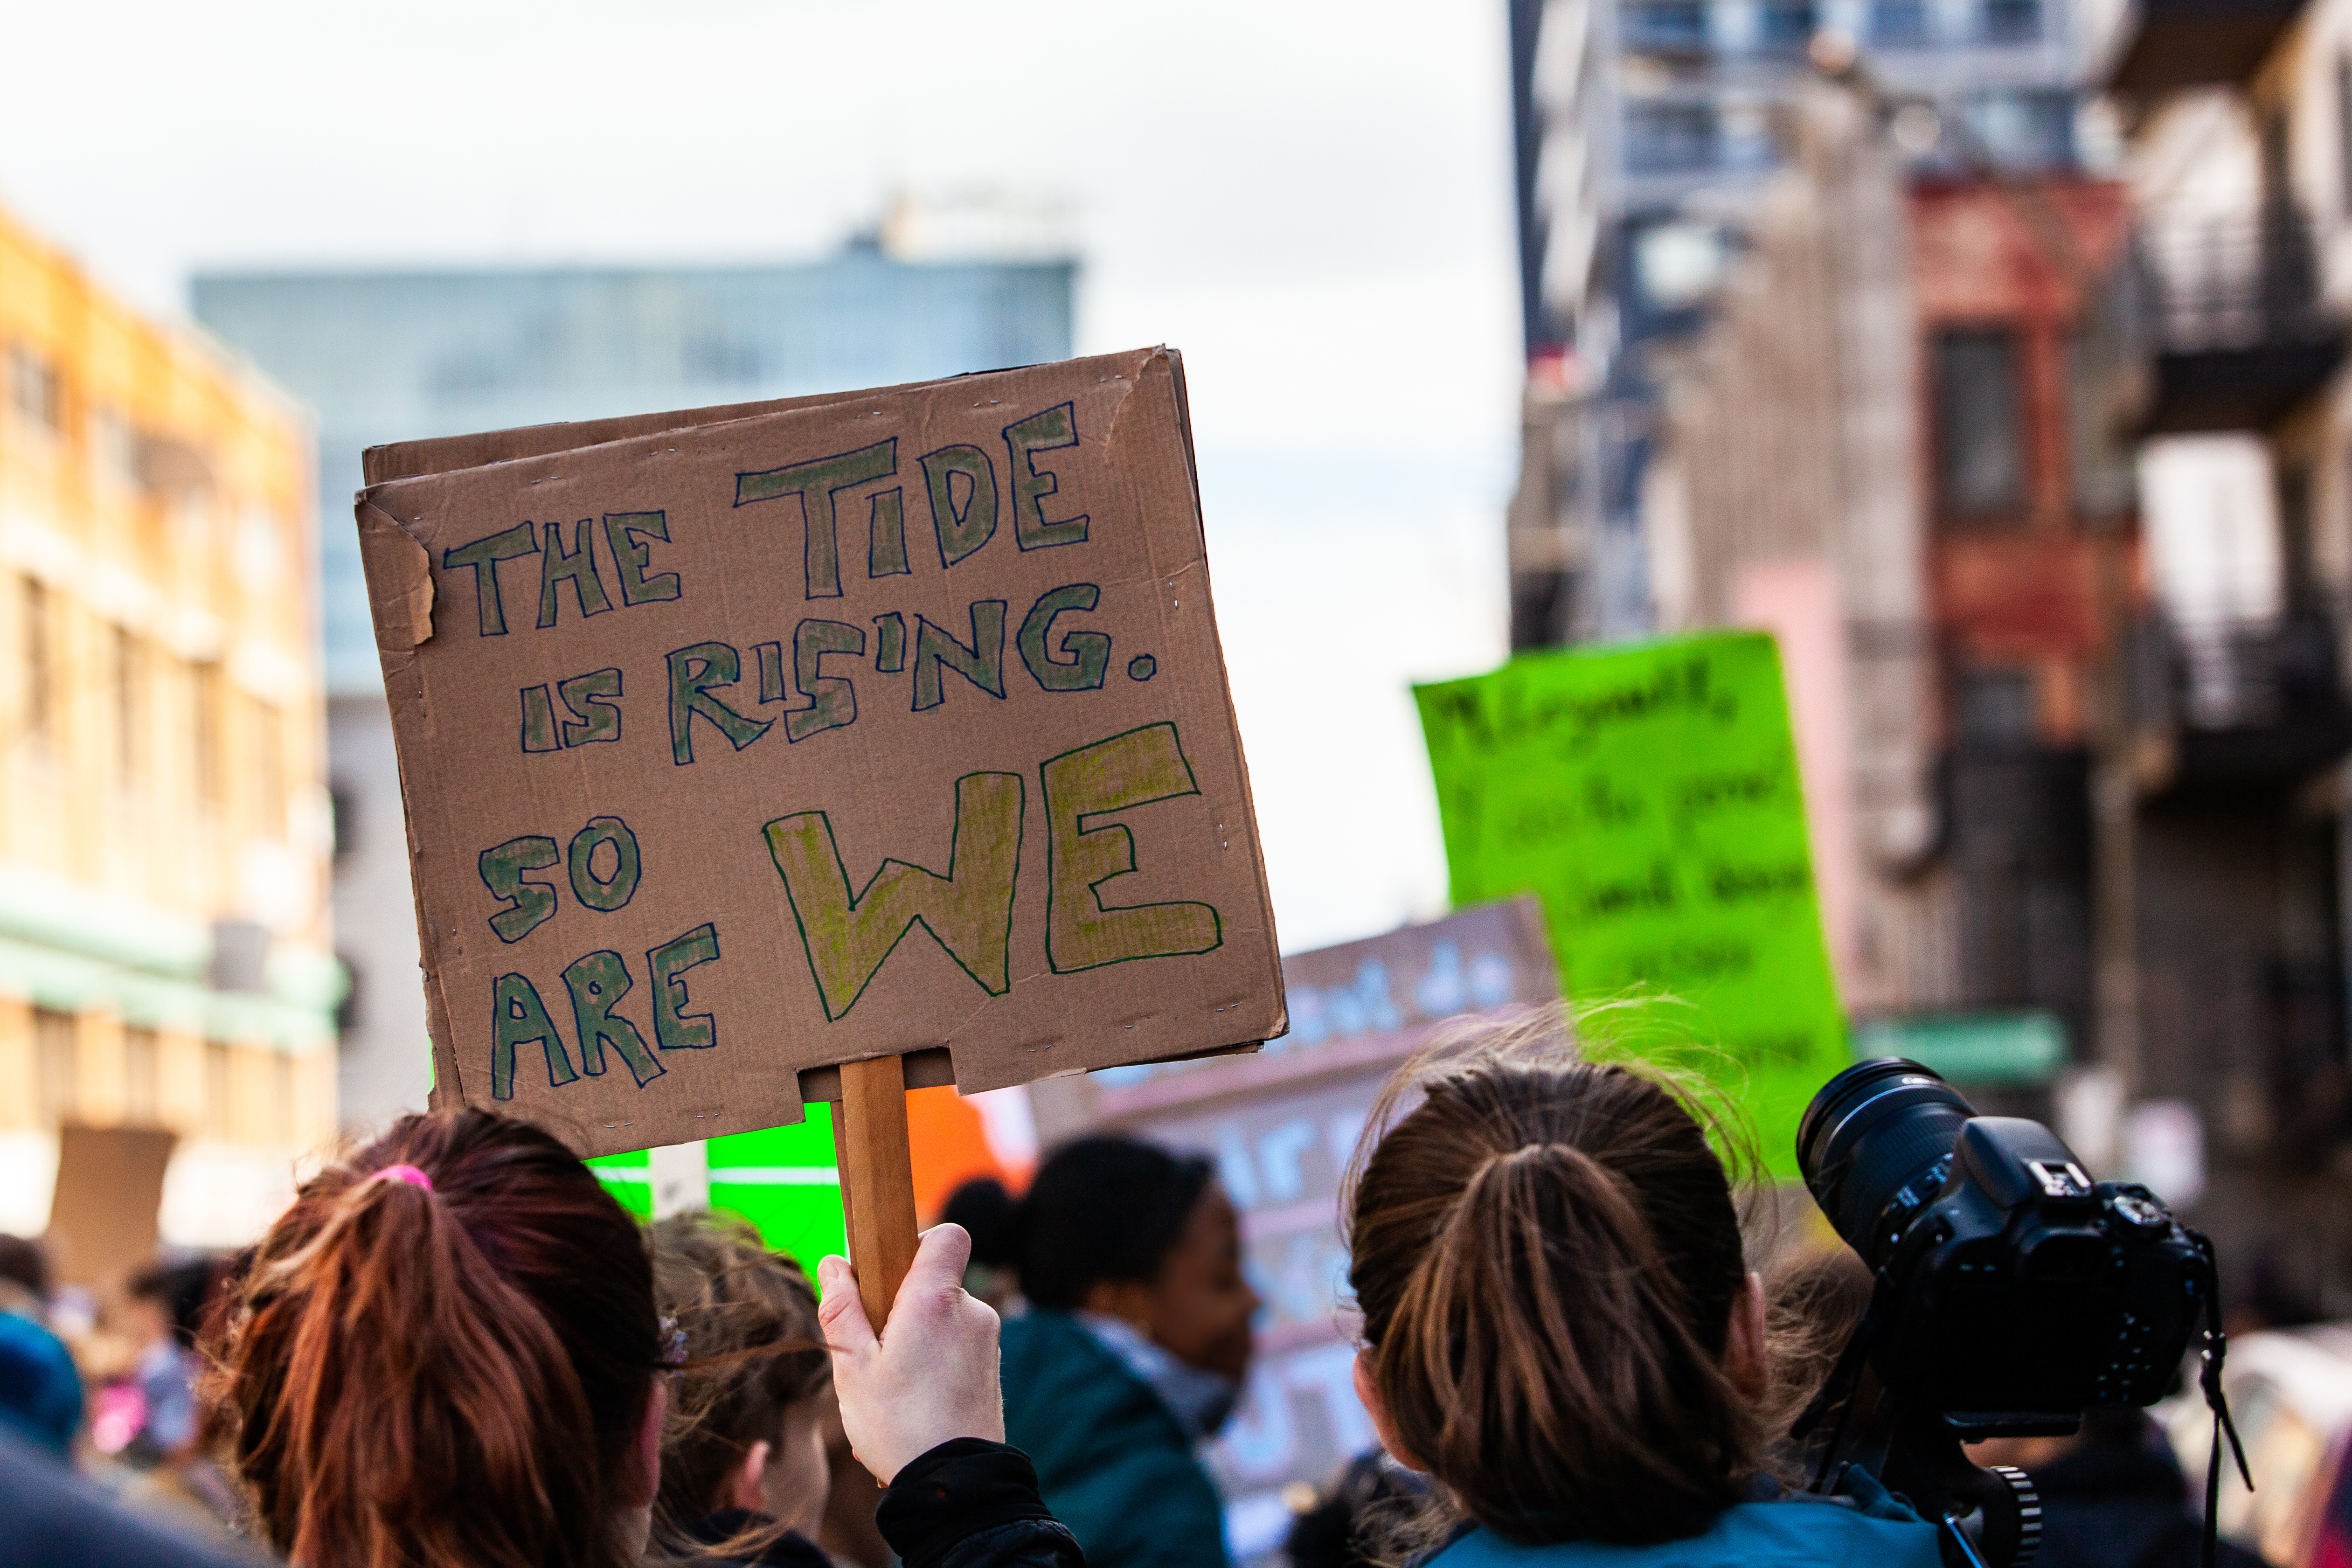 A sign being held at a protest reads "the tide is rising, so are we."